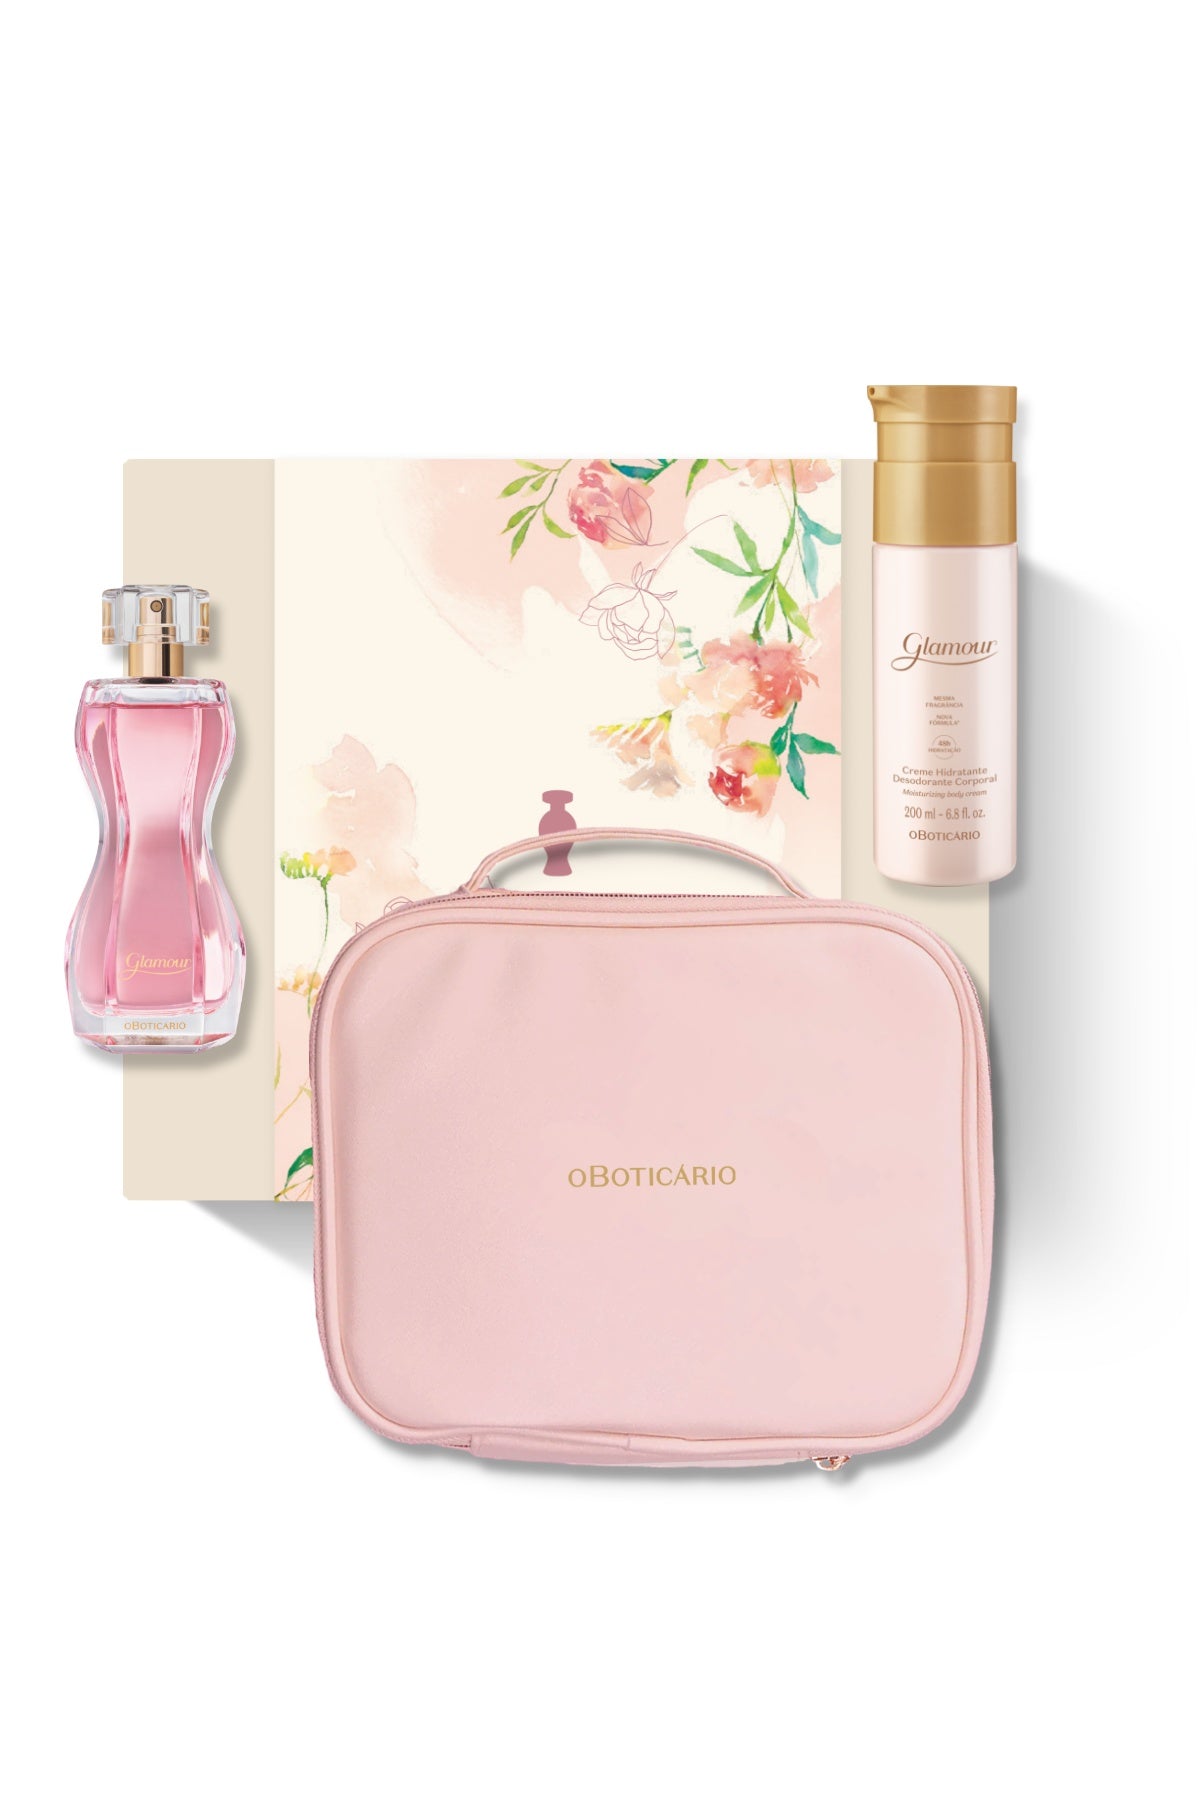 Glamour Fragrance & Body Care Mother's Day Gift Set